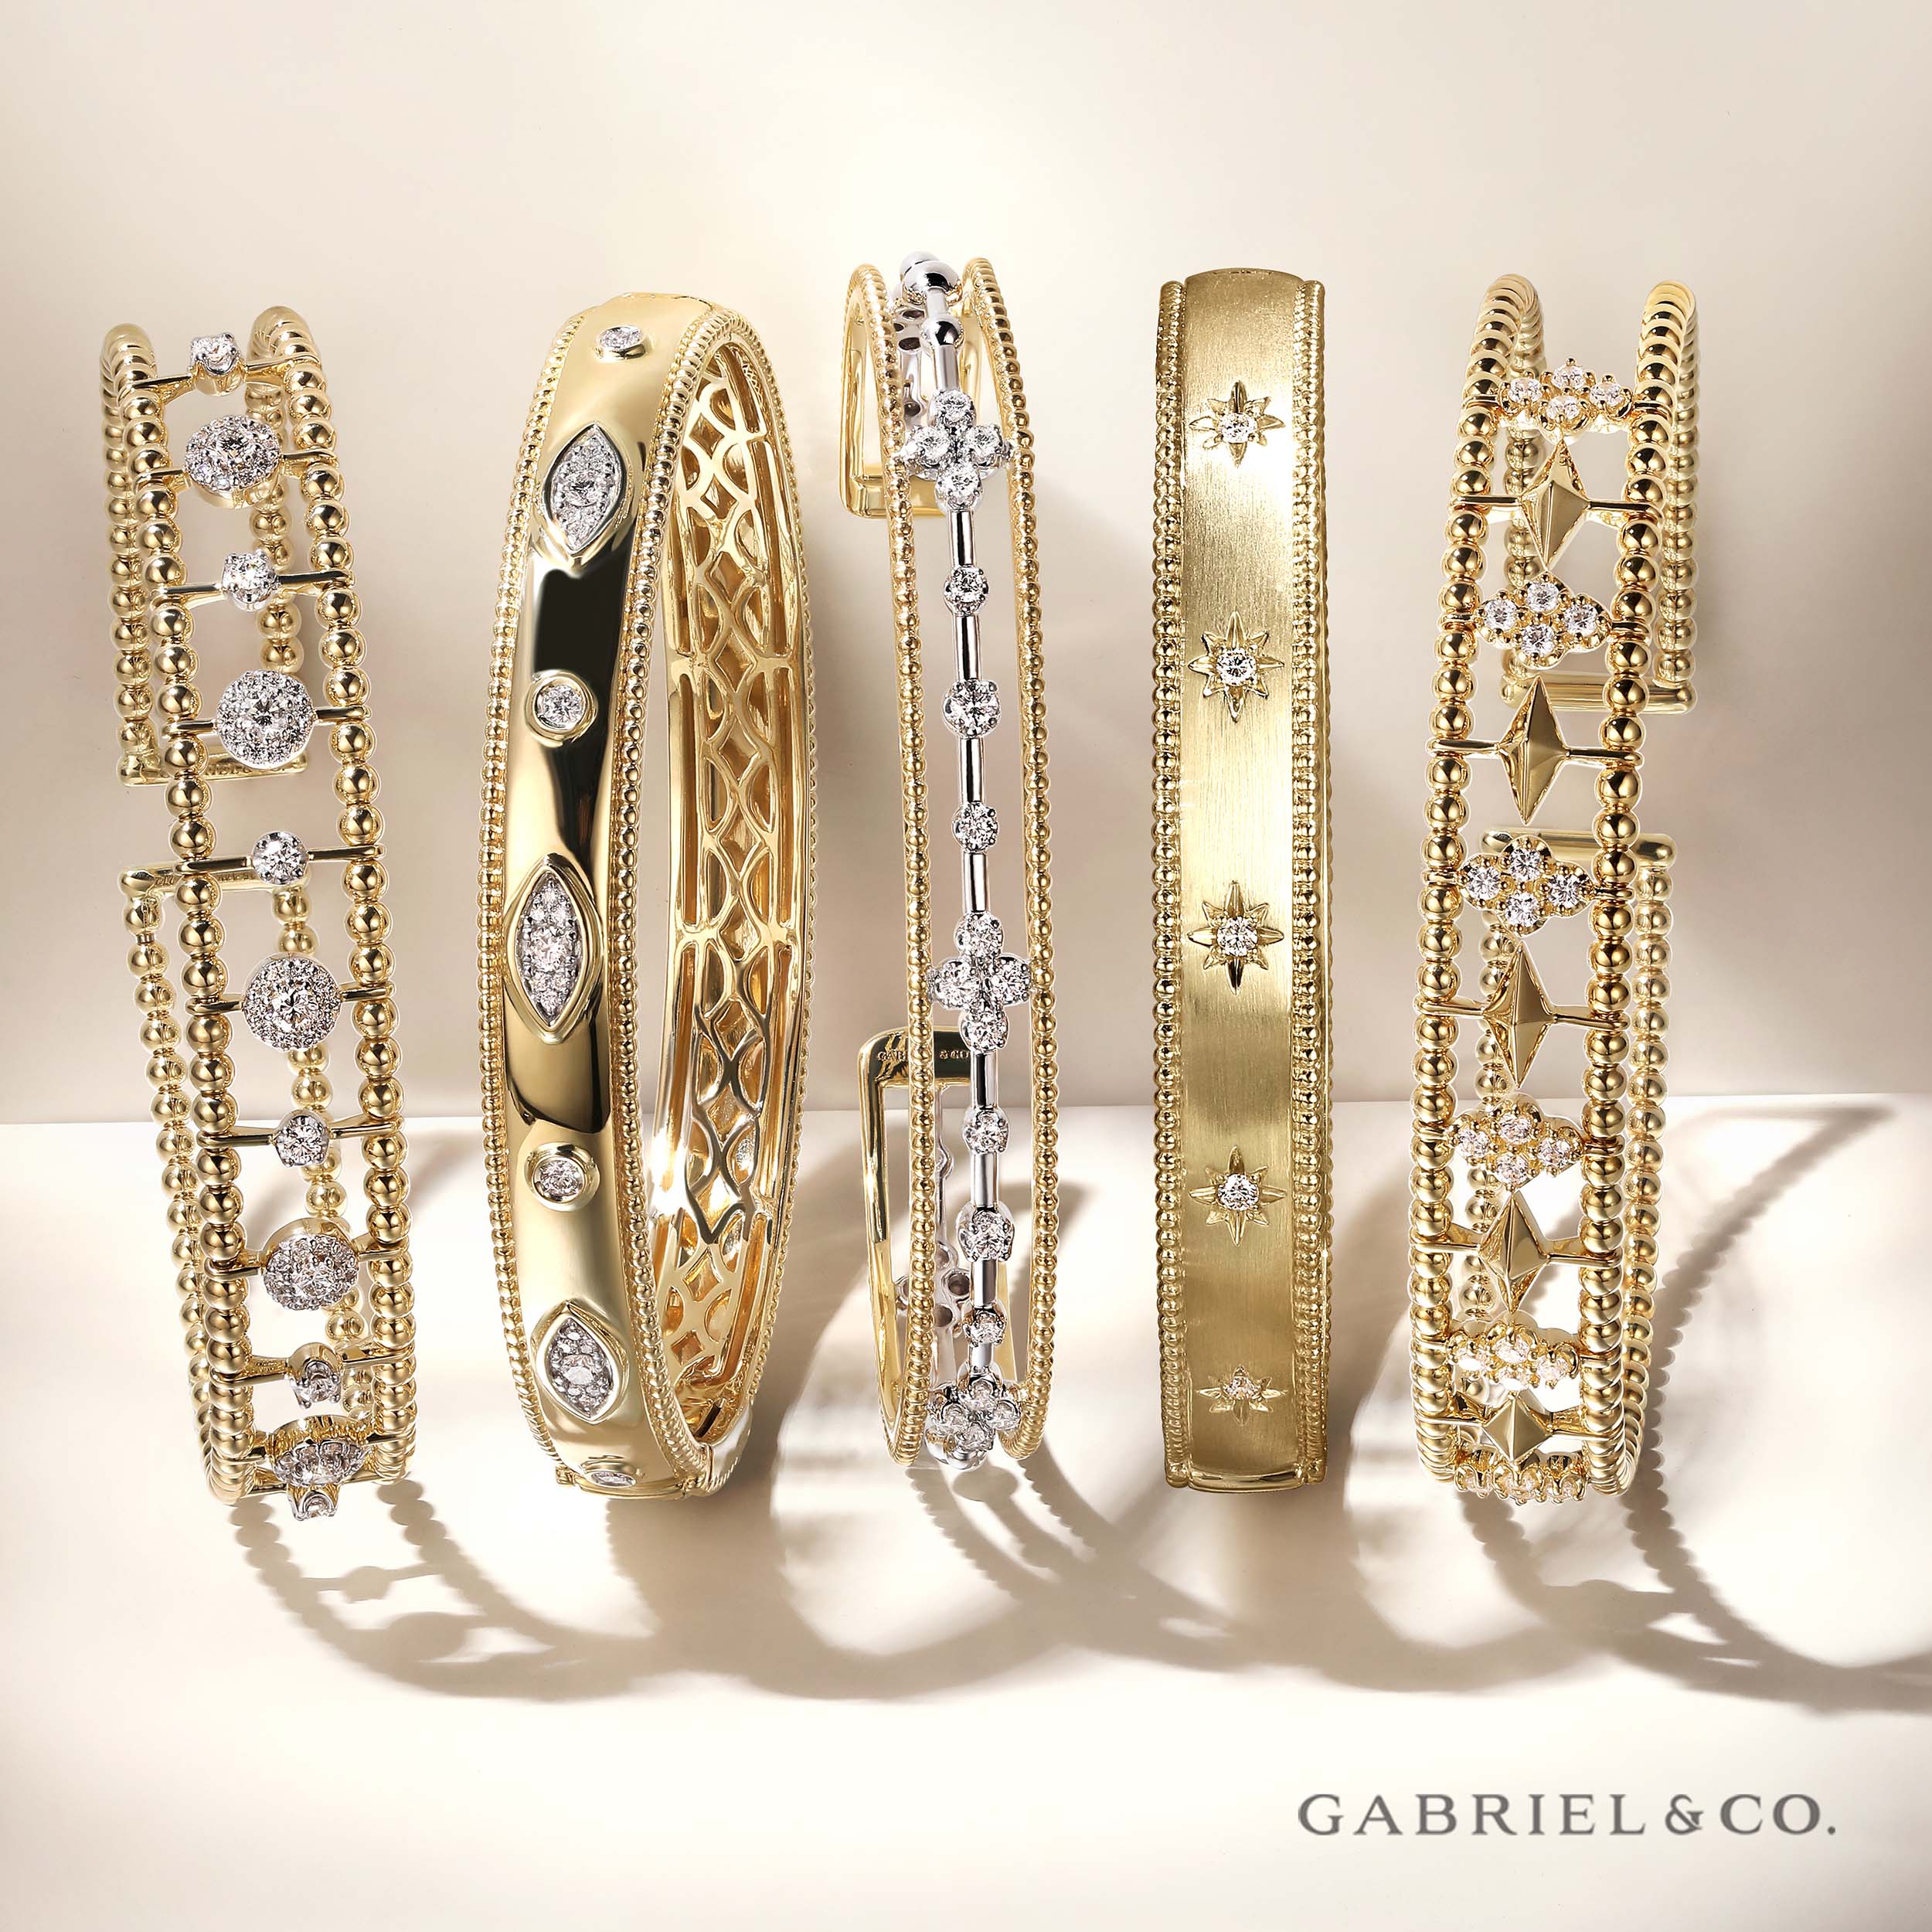 Beautiful jewelry for the Gabriel & Co. Trunk Show